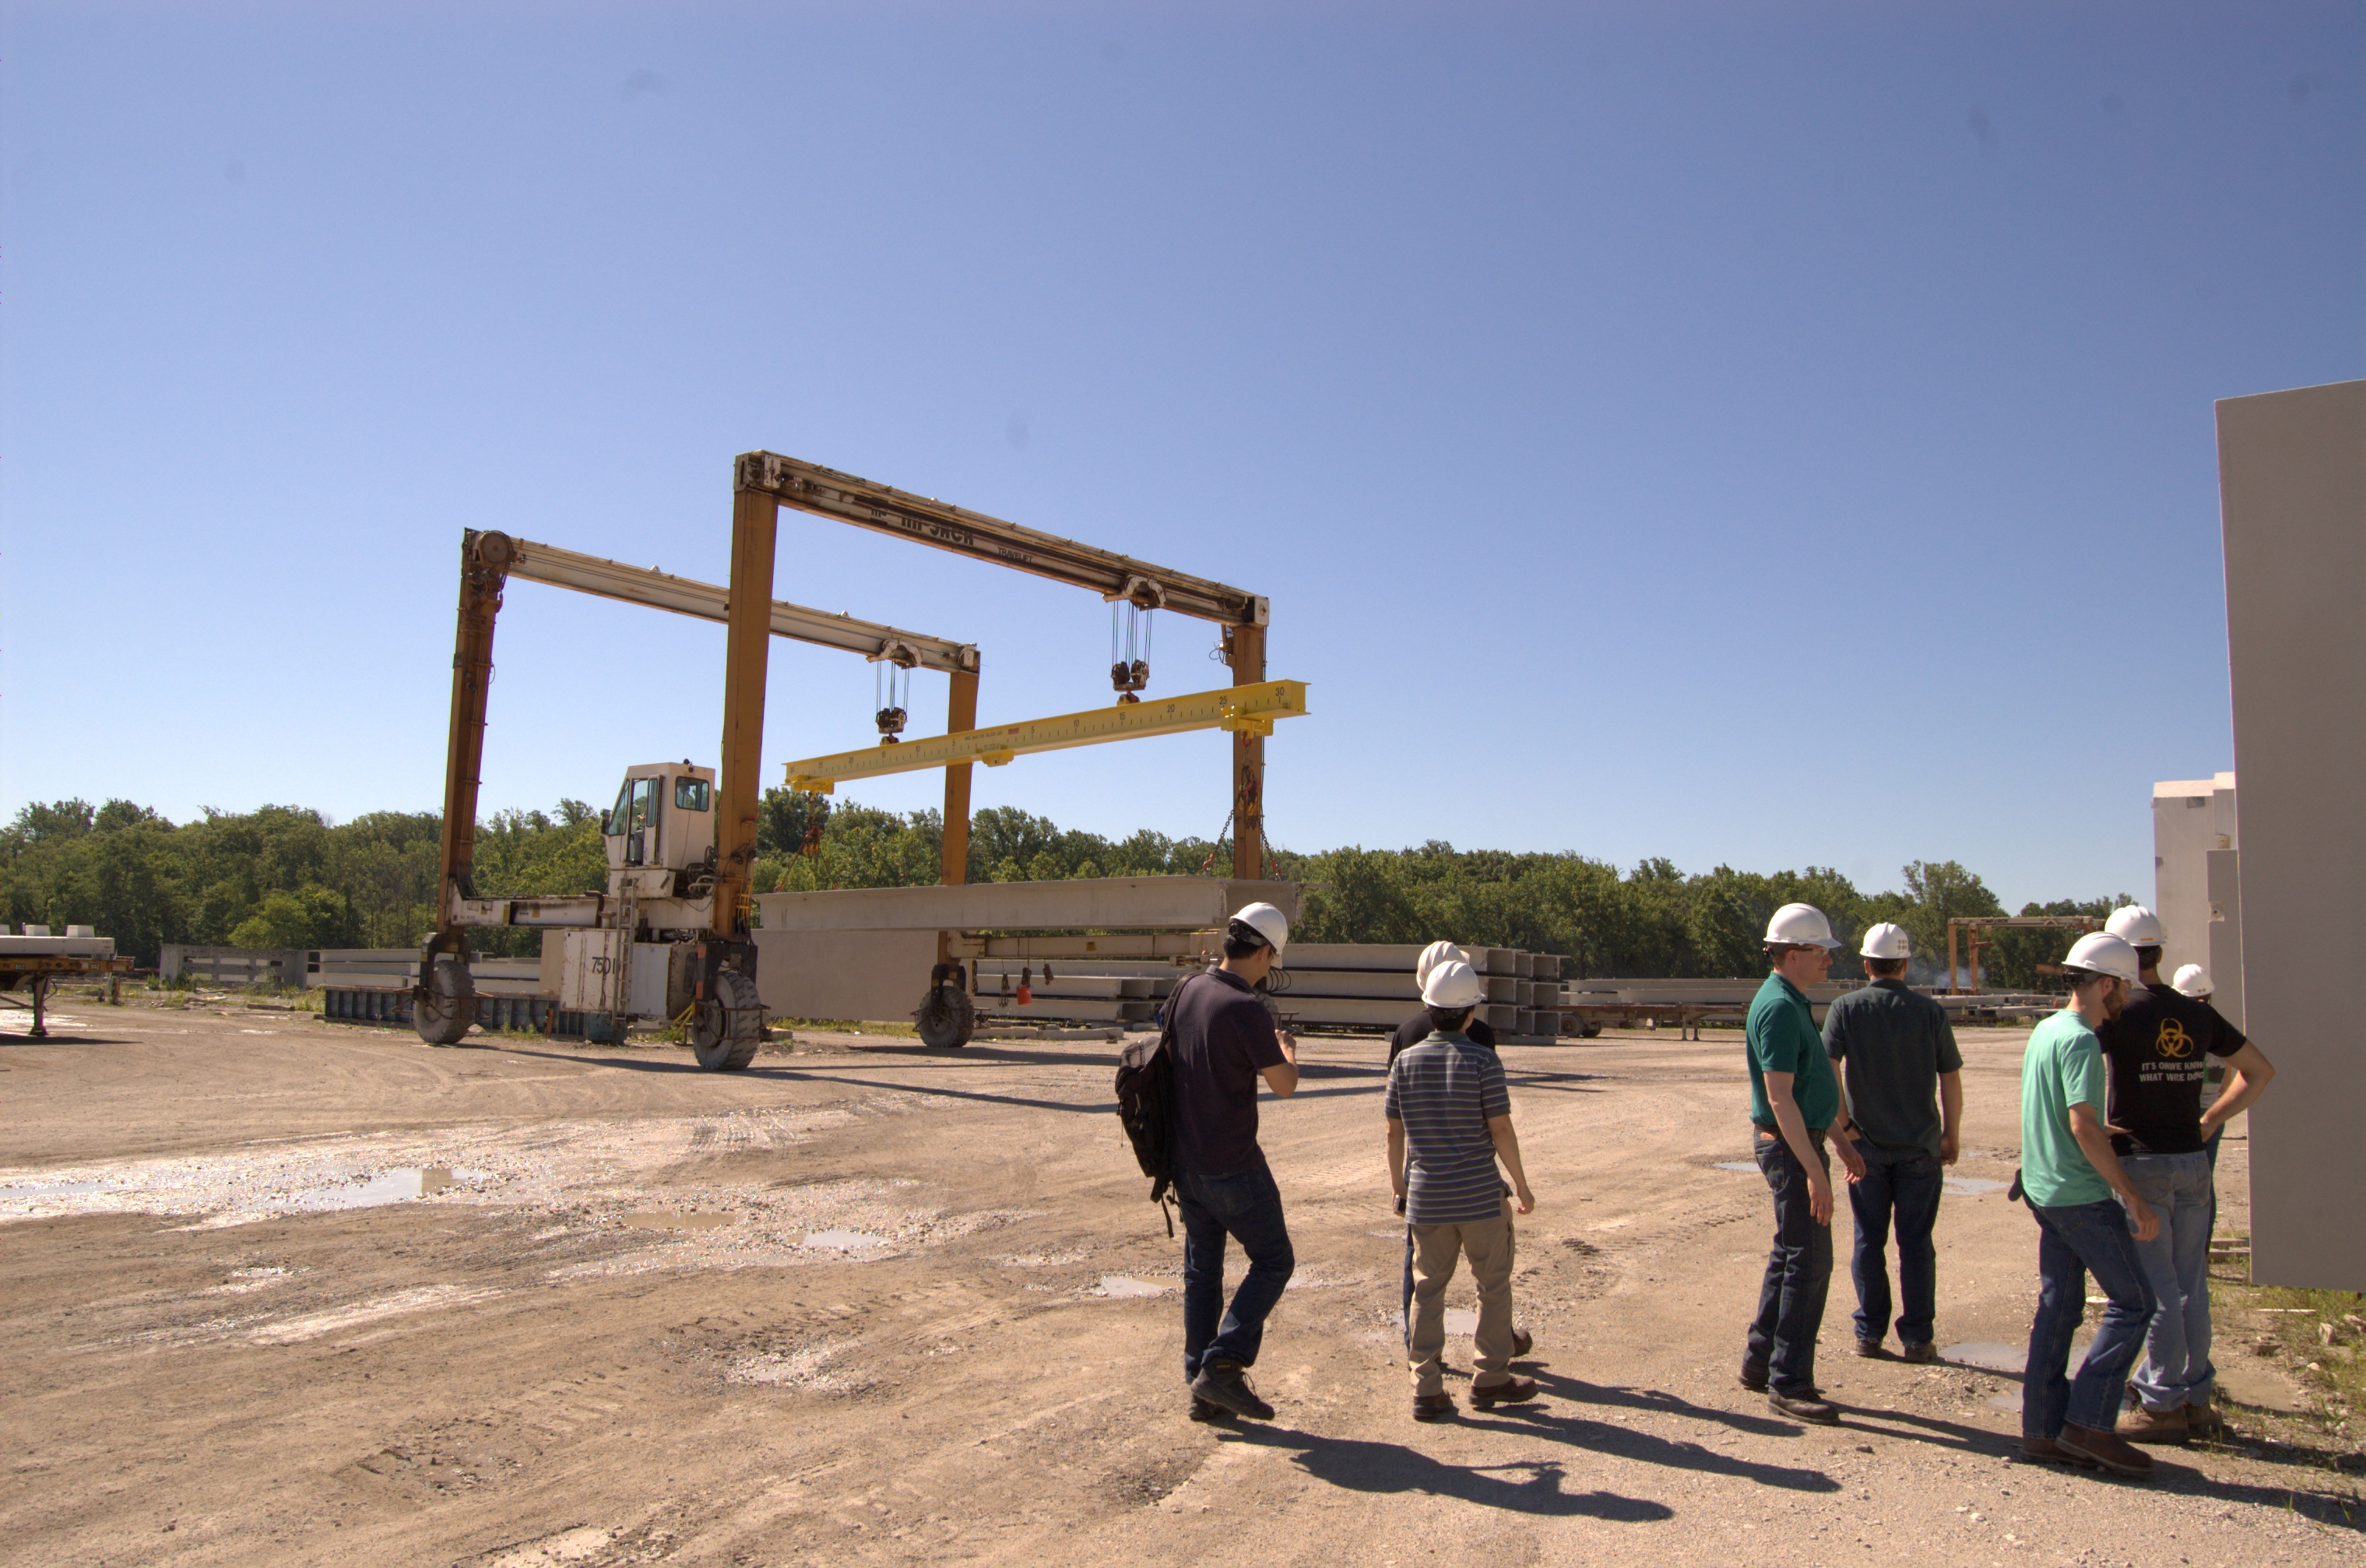 Students examining a structure in the Coreslab facility